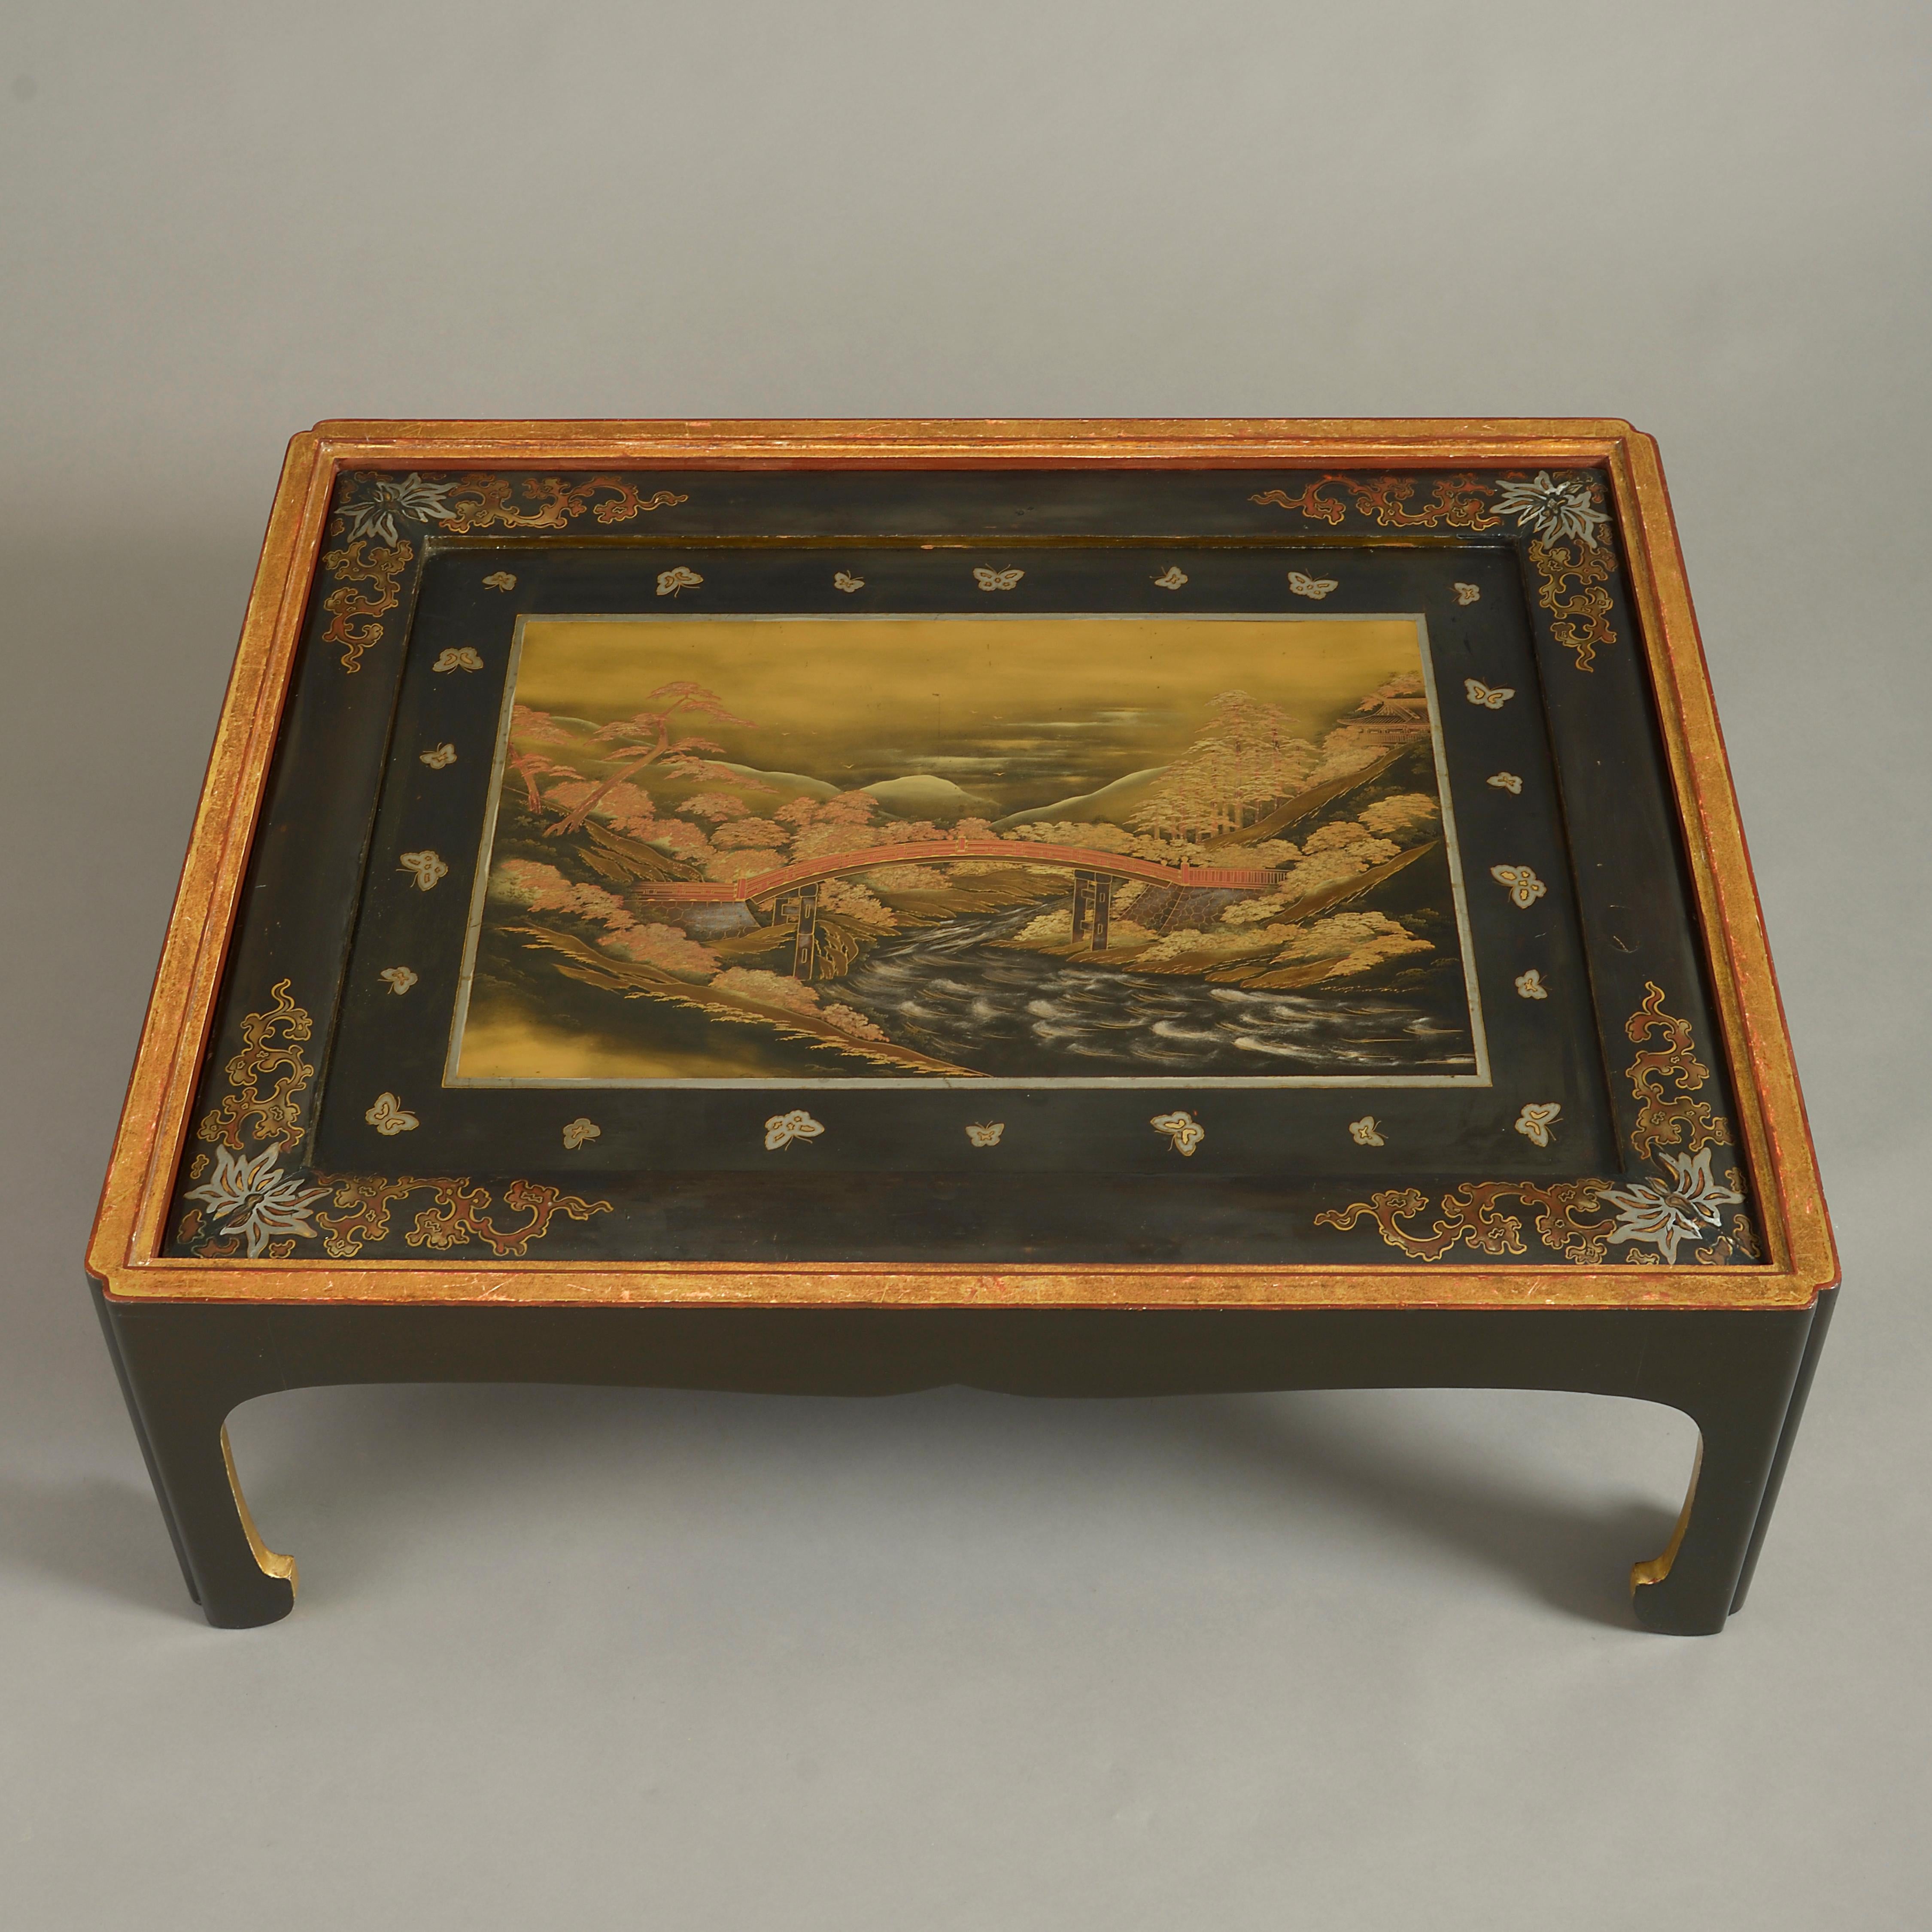 A late 19th century Japanese lacquer panel, depicting an imaginary river landscape with footbridge, set within a rectangular frame with fret cut legs as a low or coffee table.

This low table was most probably made in the second half of the